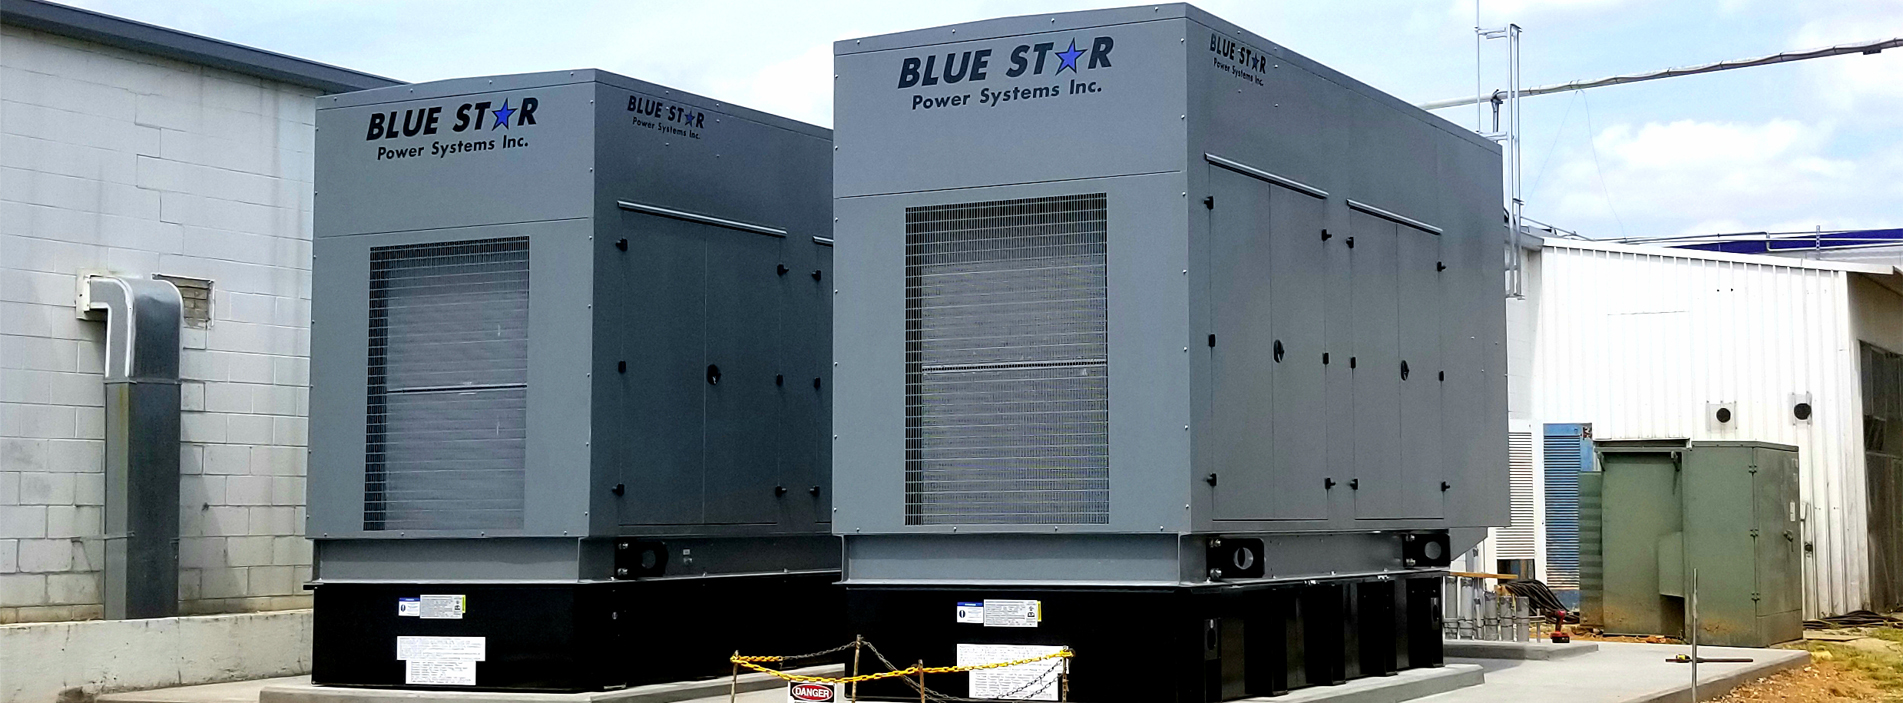 Two large blue/gray Blue Star commercial generator systems outside a white brick building.